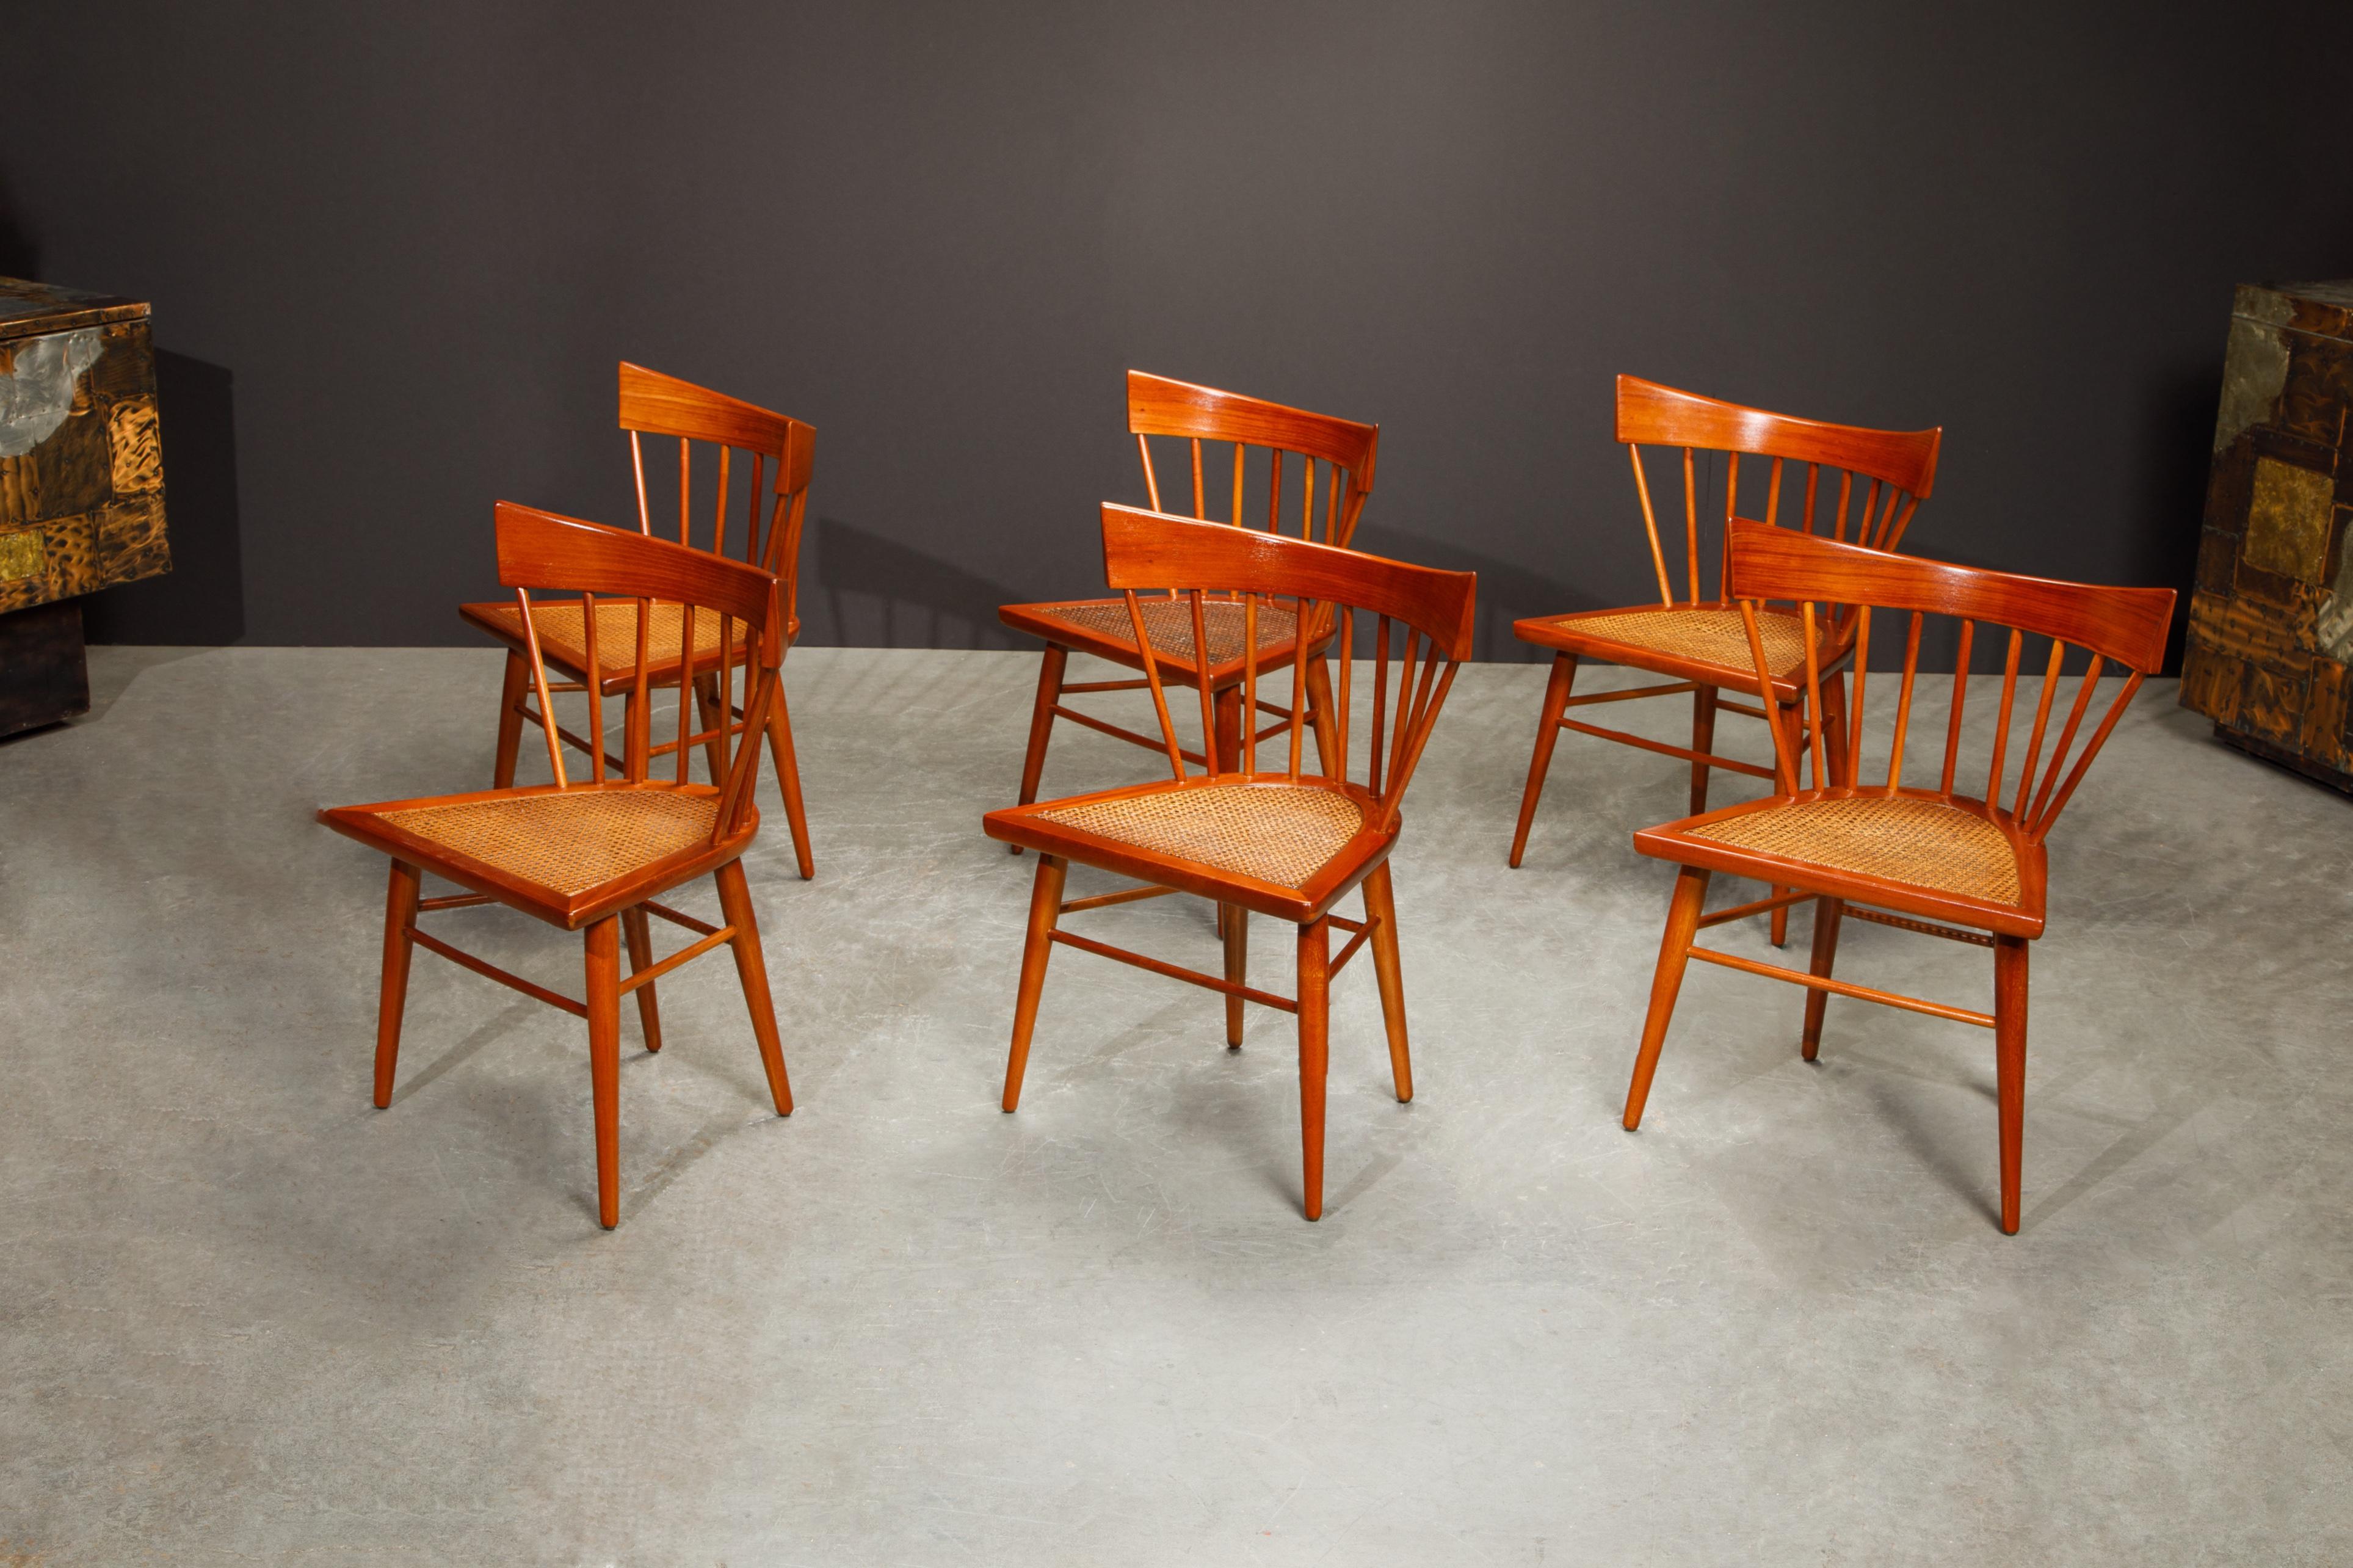 This set of six classic mid-century modern Mahogany and cane 'Yucatan' dining chairs was designed by Swedish designer Edmond J. Spence in the 1950s and produced by Industria Mueblera, Mexico. 

This vibrant Mahogany and caned 'Yucatan' dining